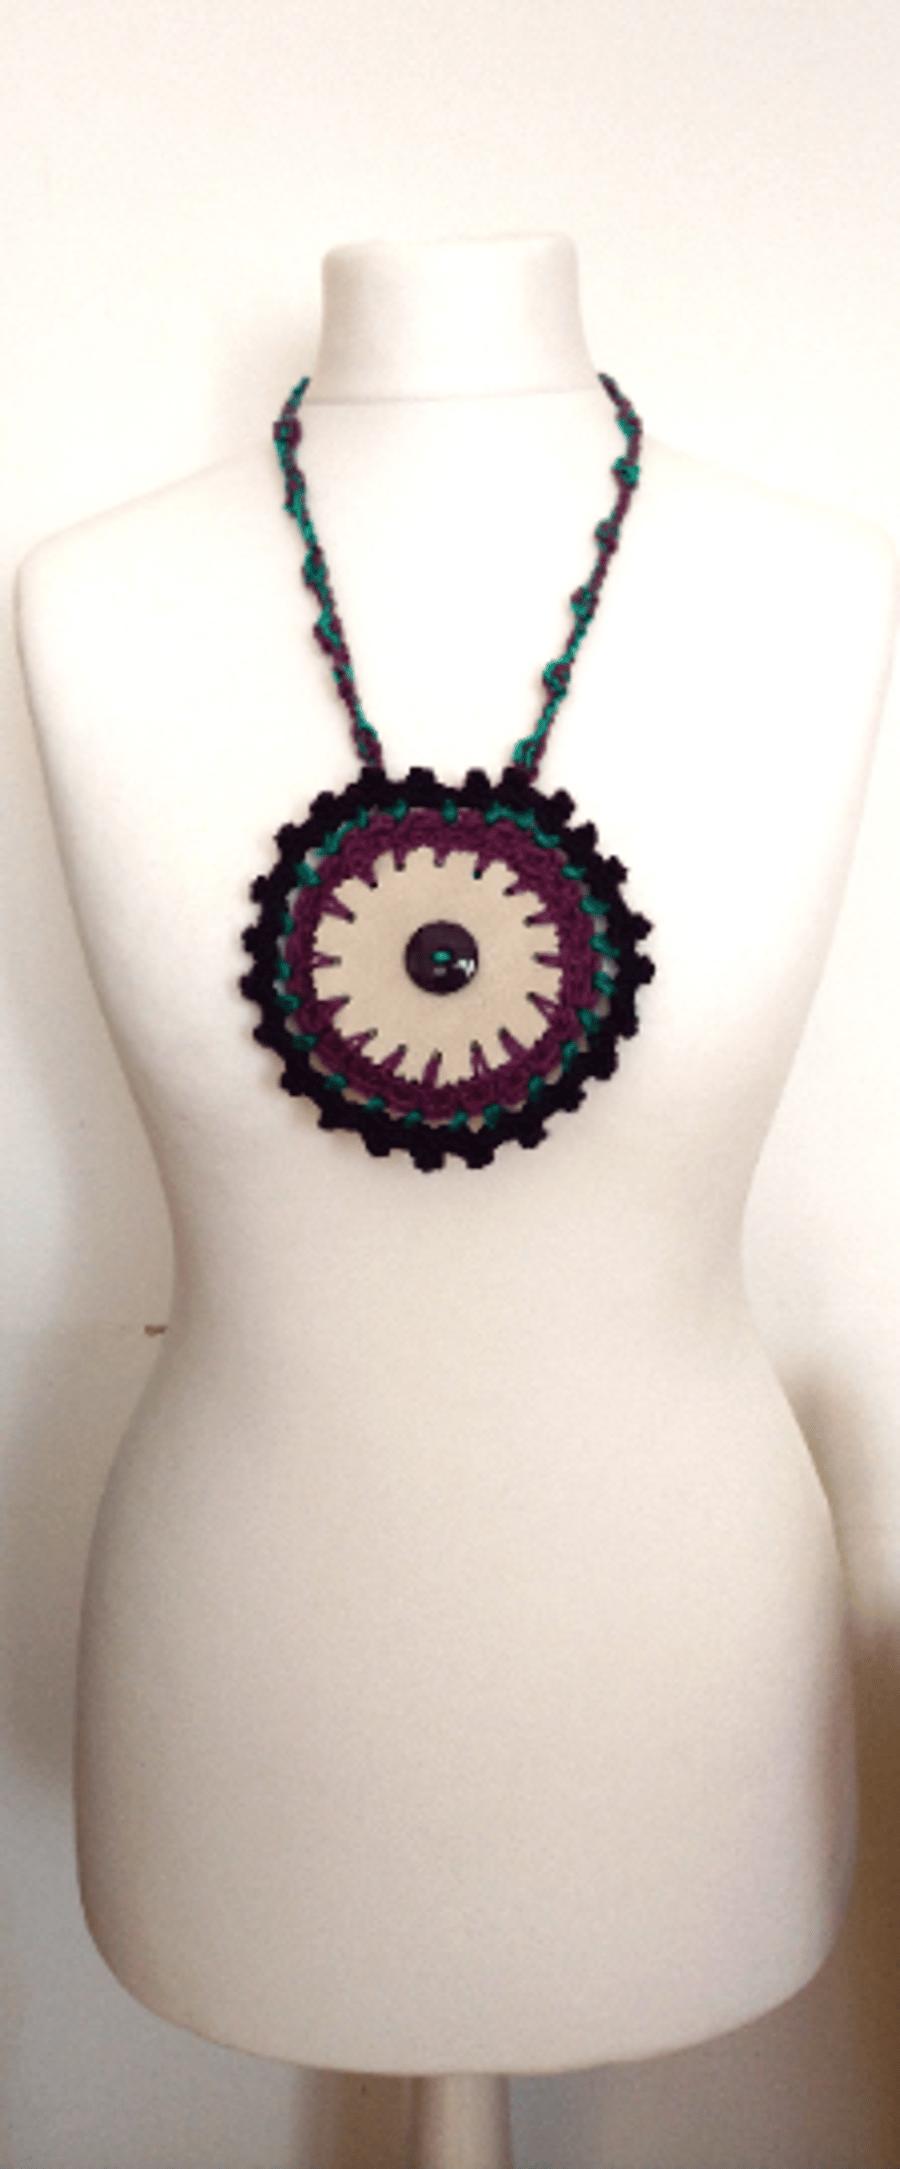 Premium Recycled Leather Pendant Crochet Necklace